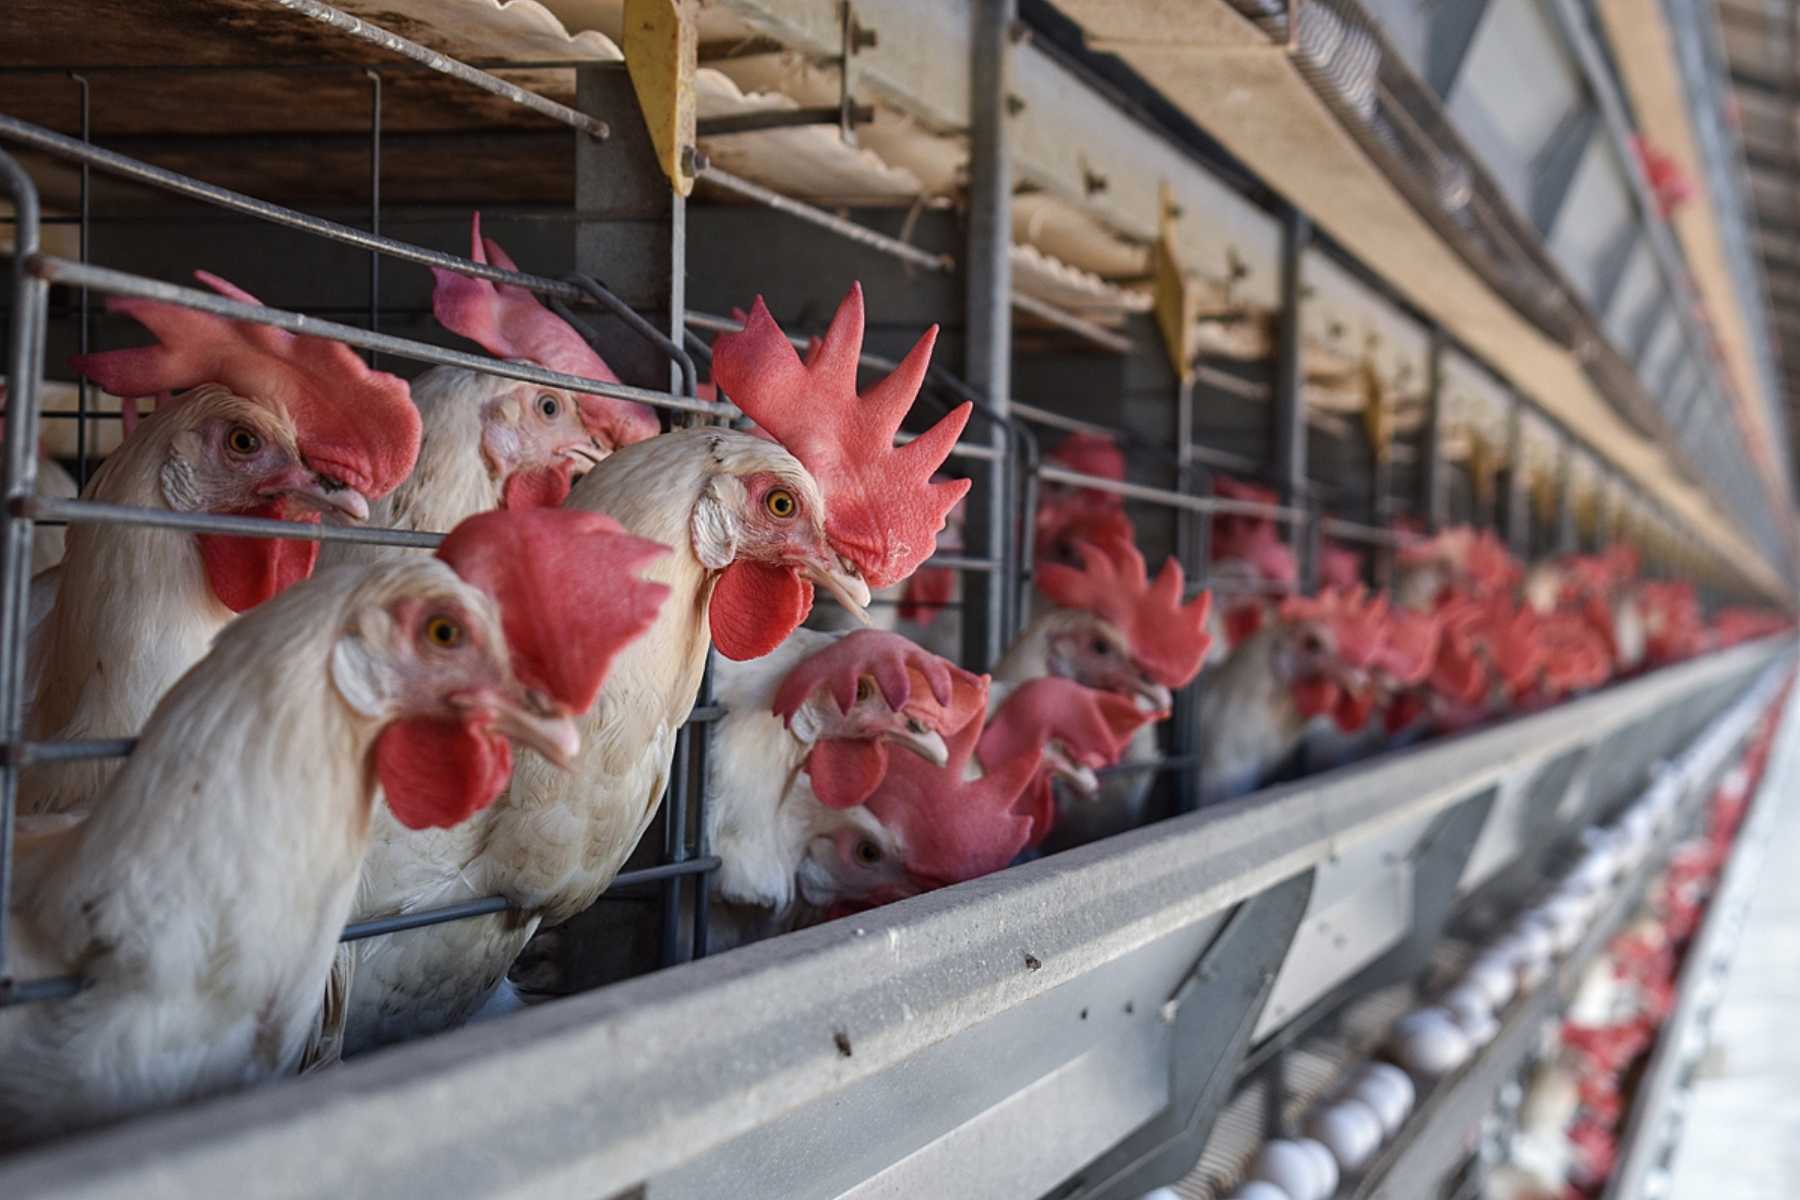 Rows of hens look out from the bars of battery cages at an egg farm.